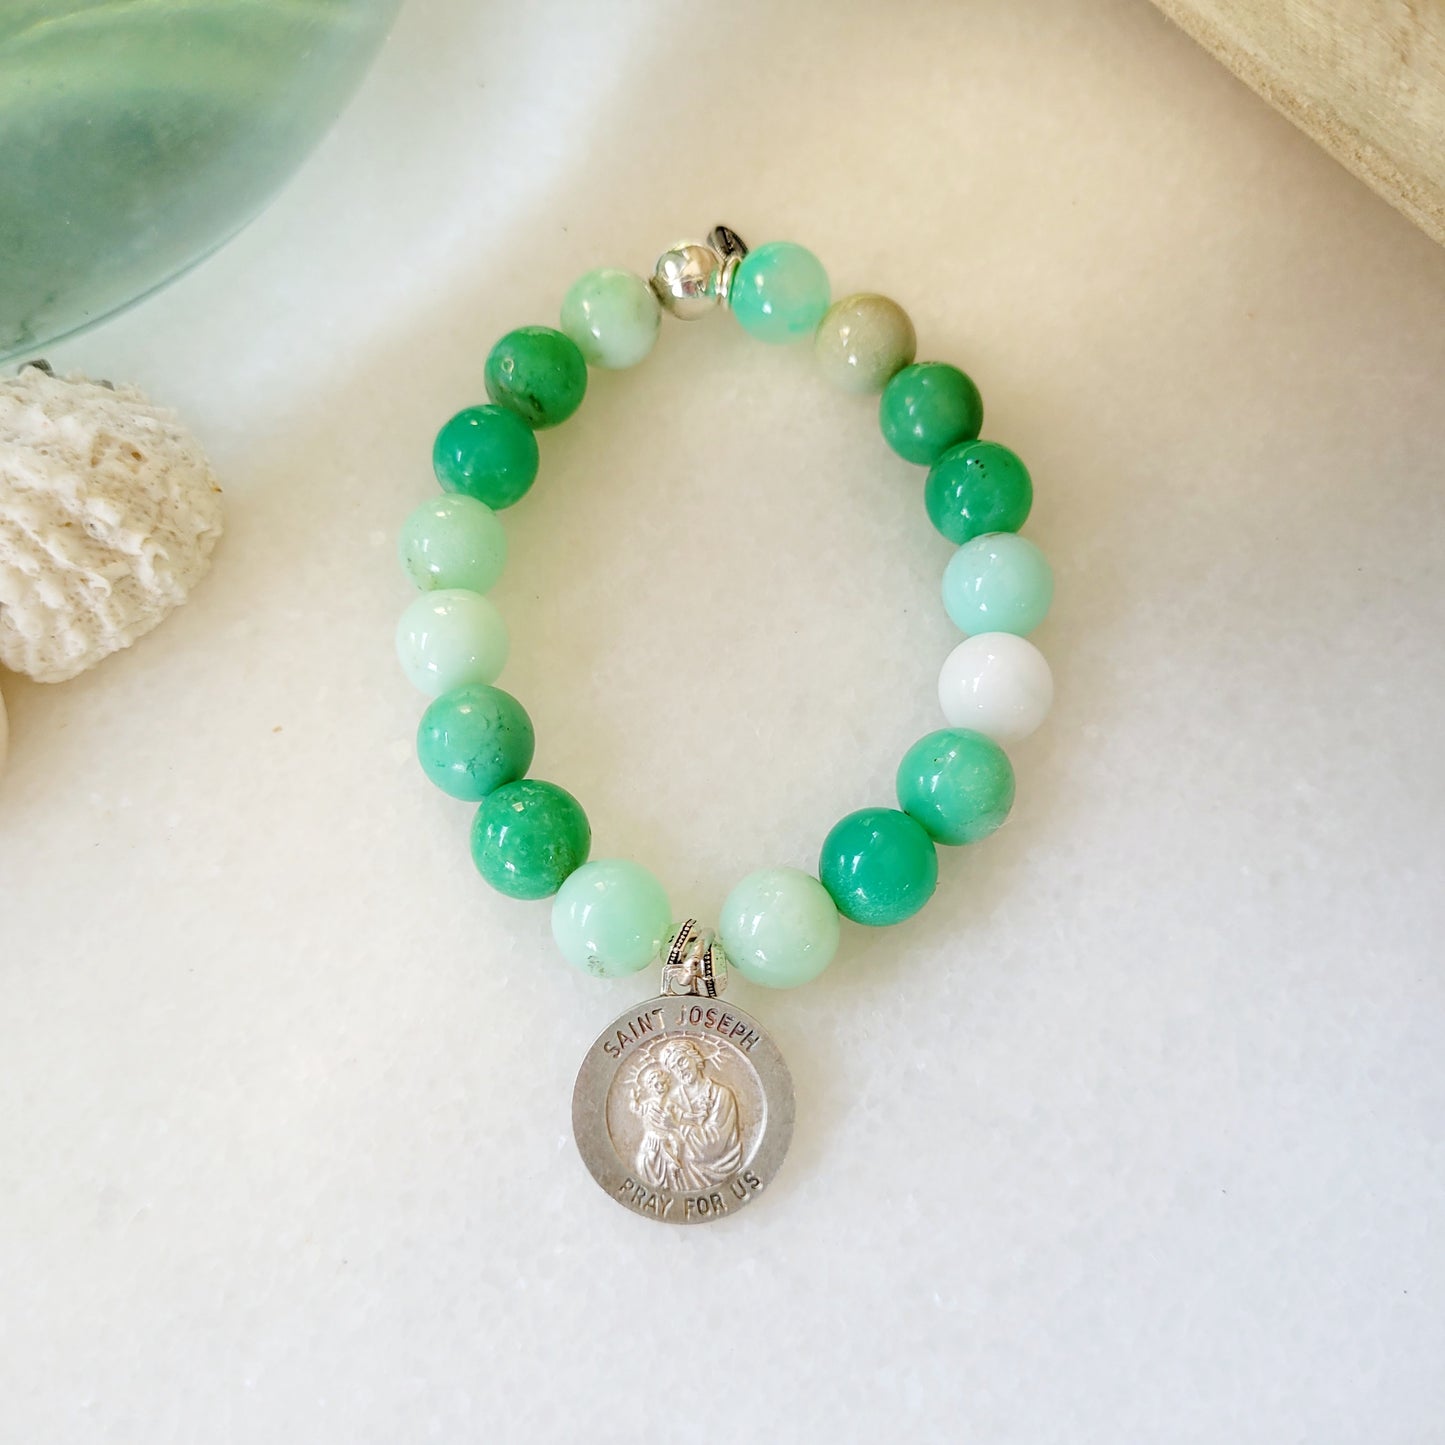 Chrysoprase 10mm Beaded Bracelet w/ Sterling Silver Medal of St. Joseph - Afterlife Jewelry Designs